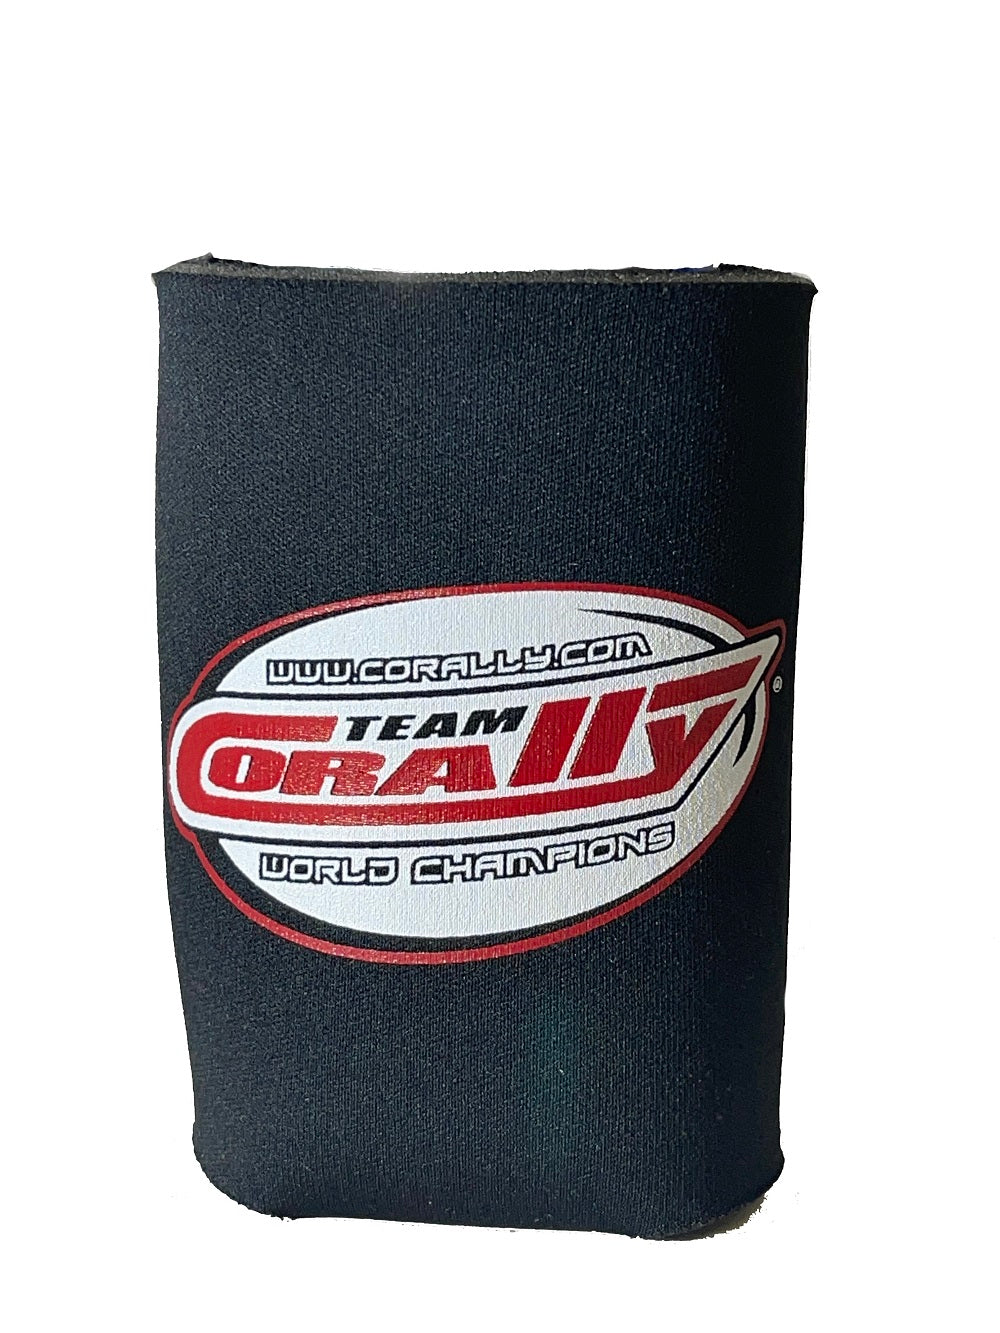 Corally Hold my Drink & Watch This! Coozie, by HRP - Dirt Cheap RC SAVING YOU MONEY, ONE PART AT A TIME